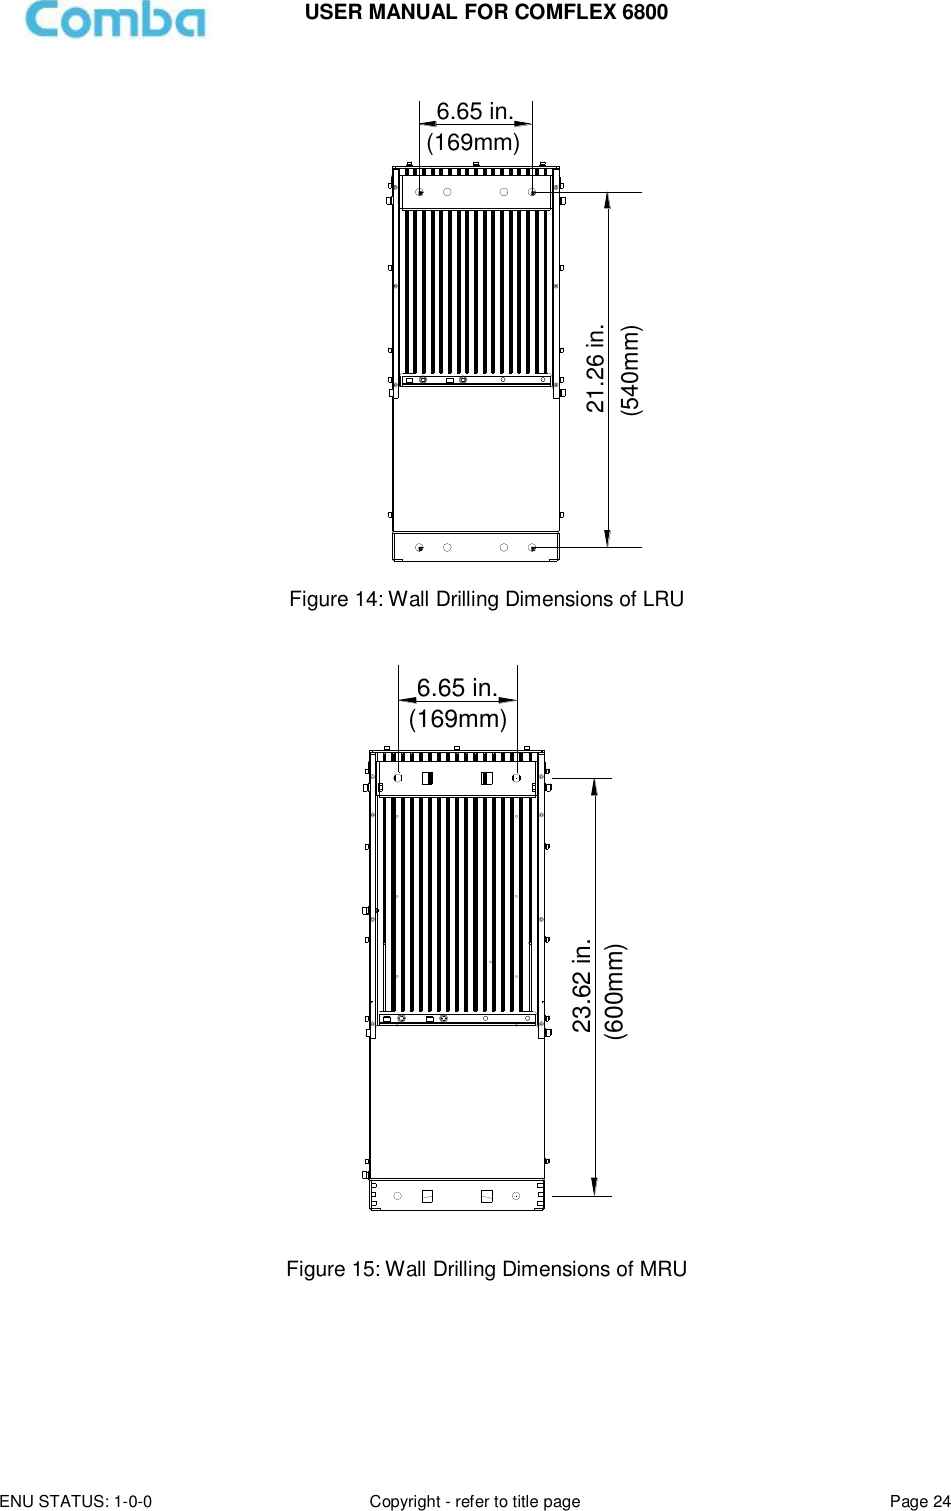 USER MANUAL FOR COMFLEX 6800 ENU STATUS: 1-0-0 Copyright - refer to title page Page 24   6.65 in.21.26 in.(540mm)(169mm) Figure 14: Wall Drilling Dimensions of LRU  23.62 in.6.65 in.(169mm)(600mm) Figure 15: Wall Drilling Dimensions of MRU     